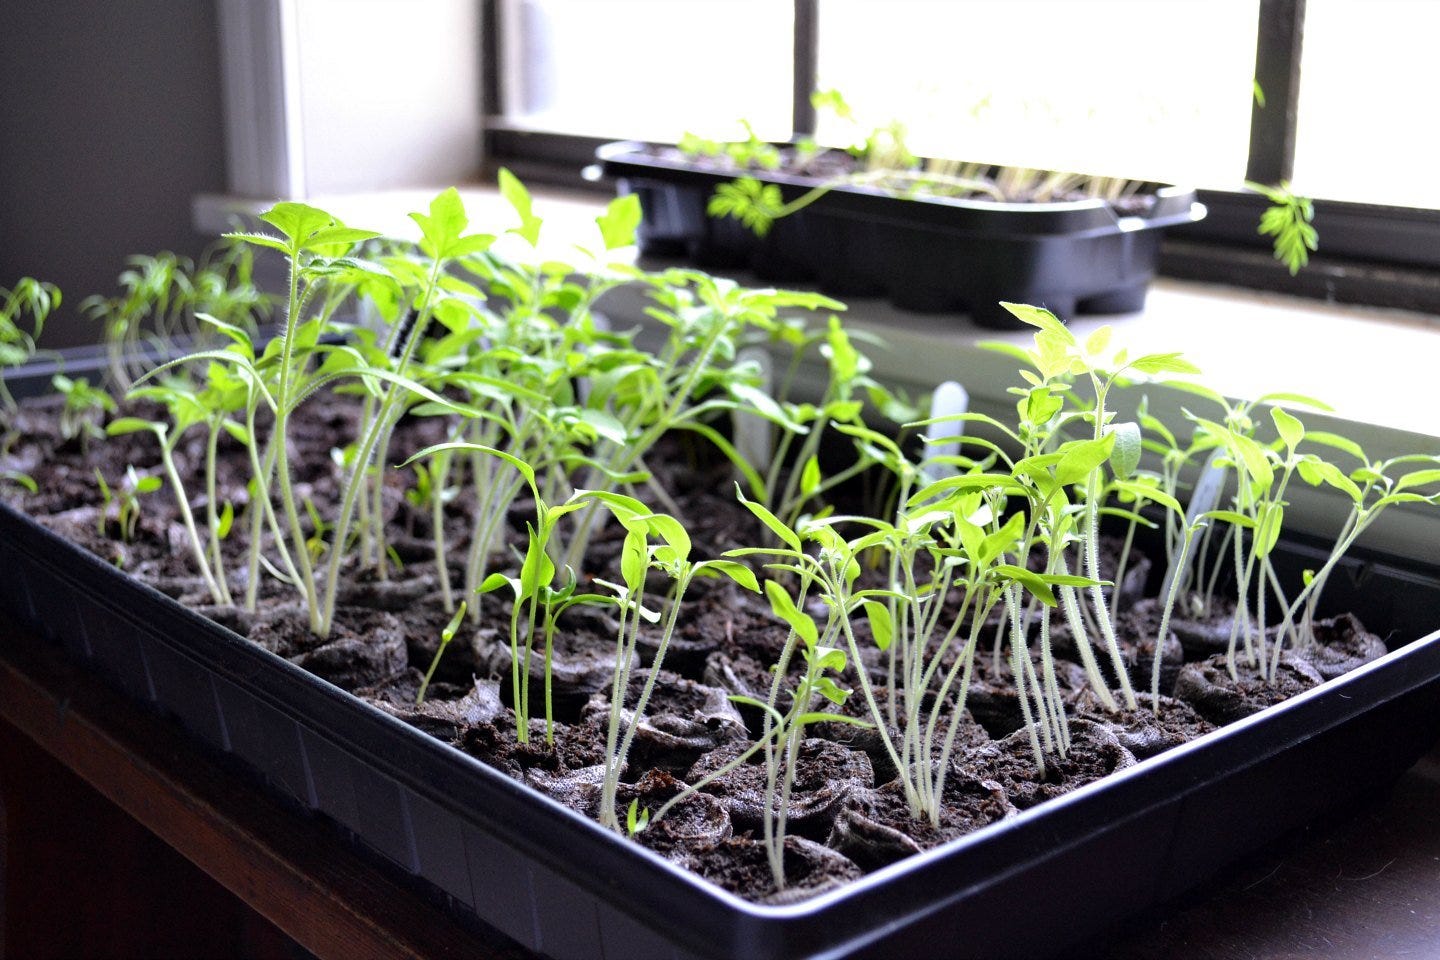 Growing Seedlings for My First Veggie Garden • Ugly Duckling House